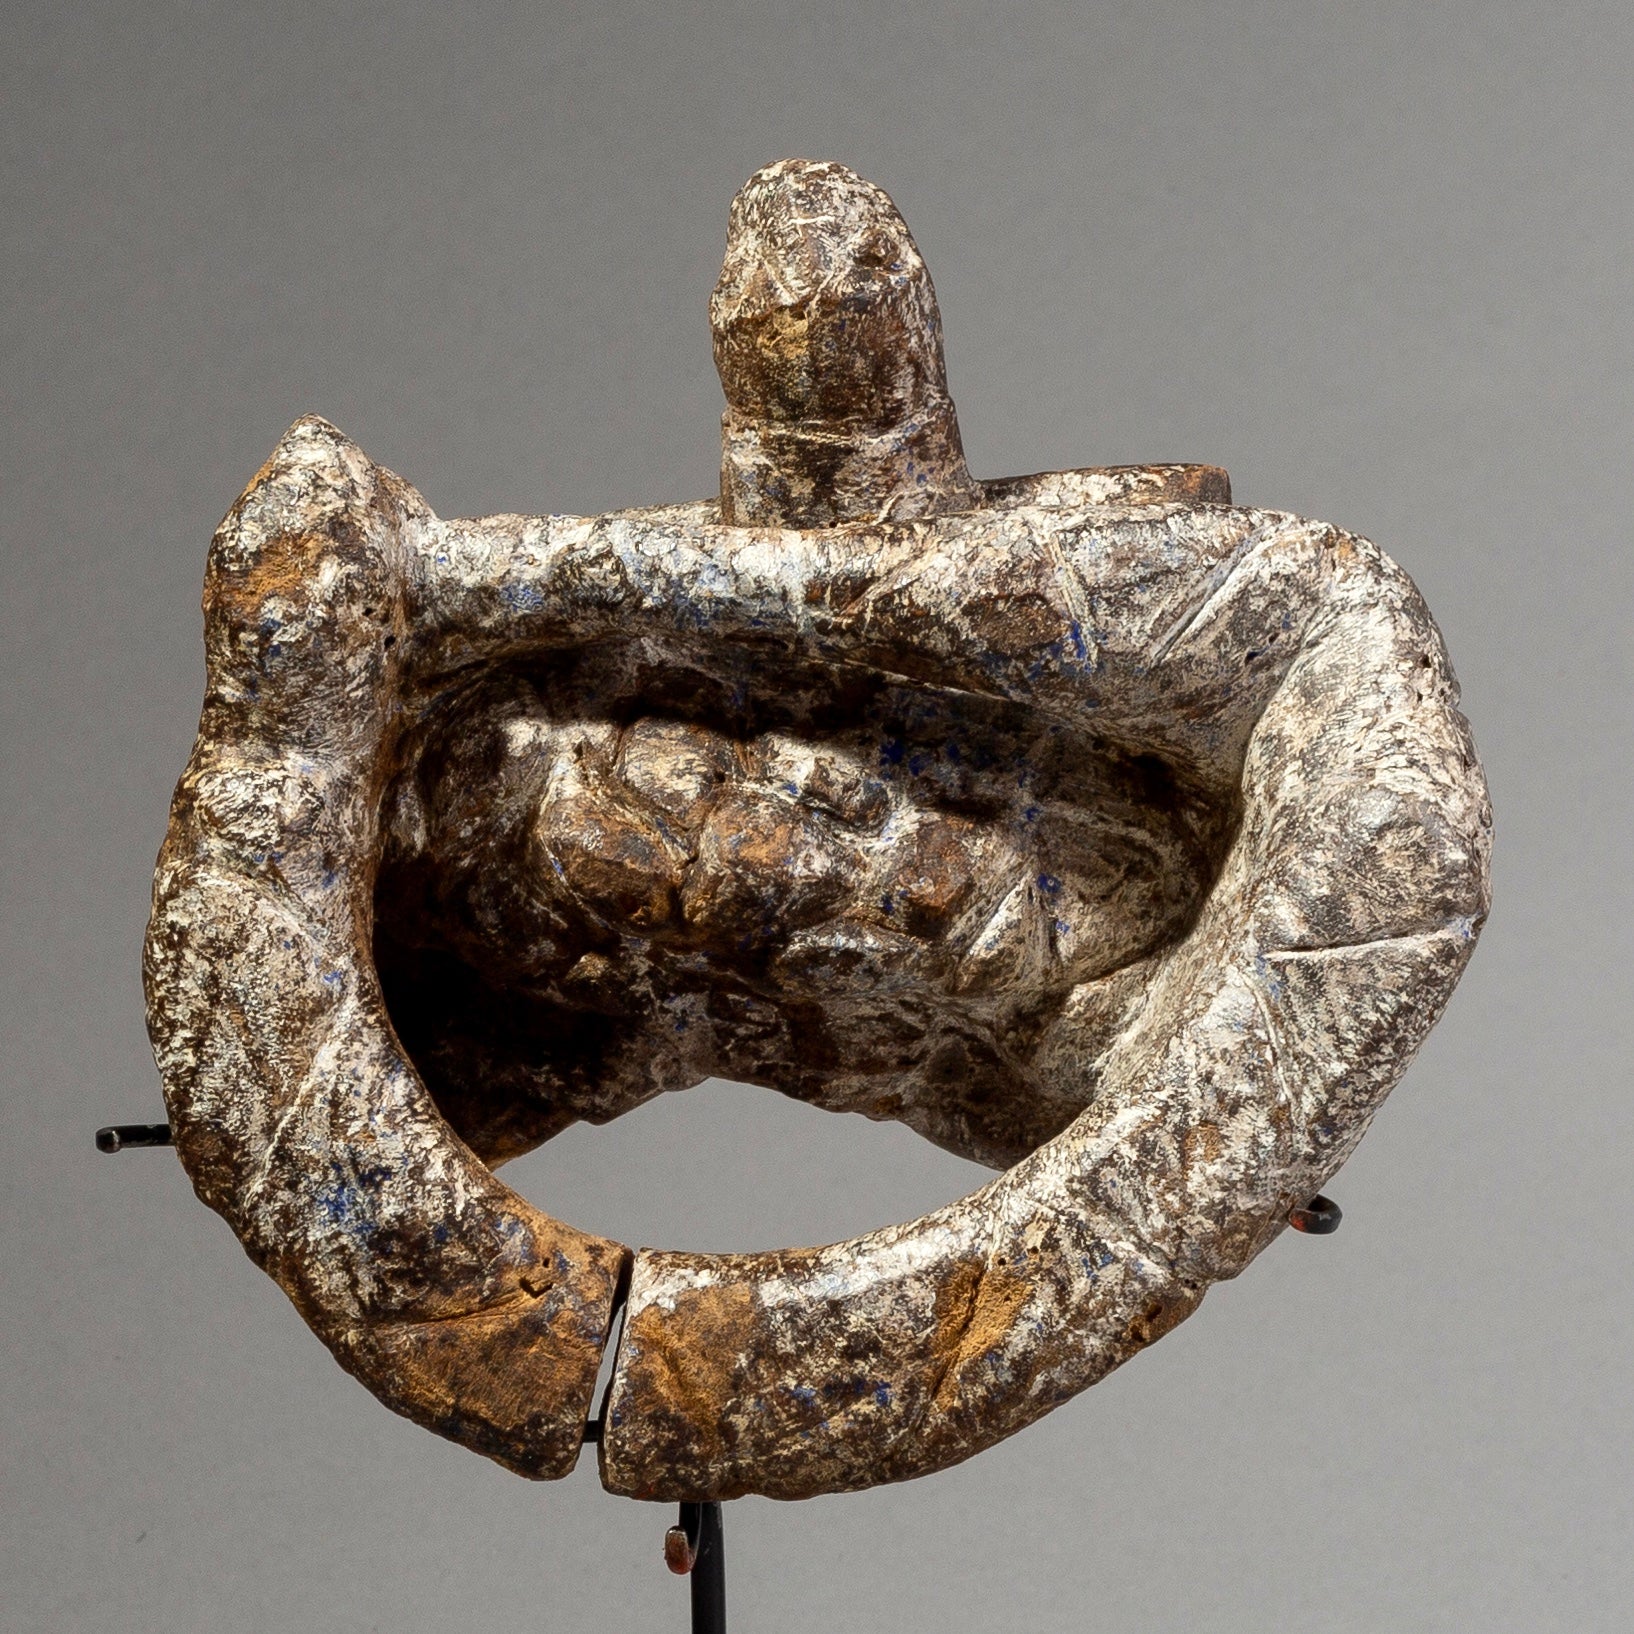 A TANGLED TURTLE FETISH FROM THE EWE TRIBE OF GHANA WEST AFRICA ( No 737)